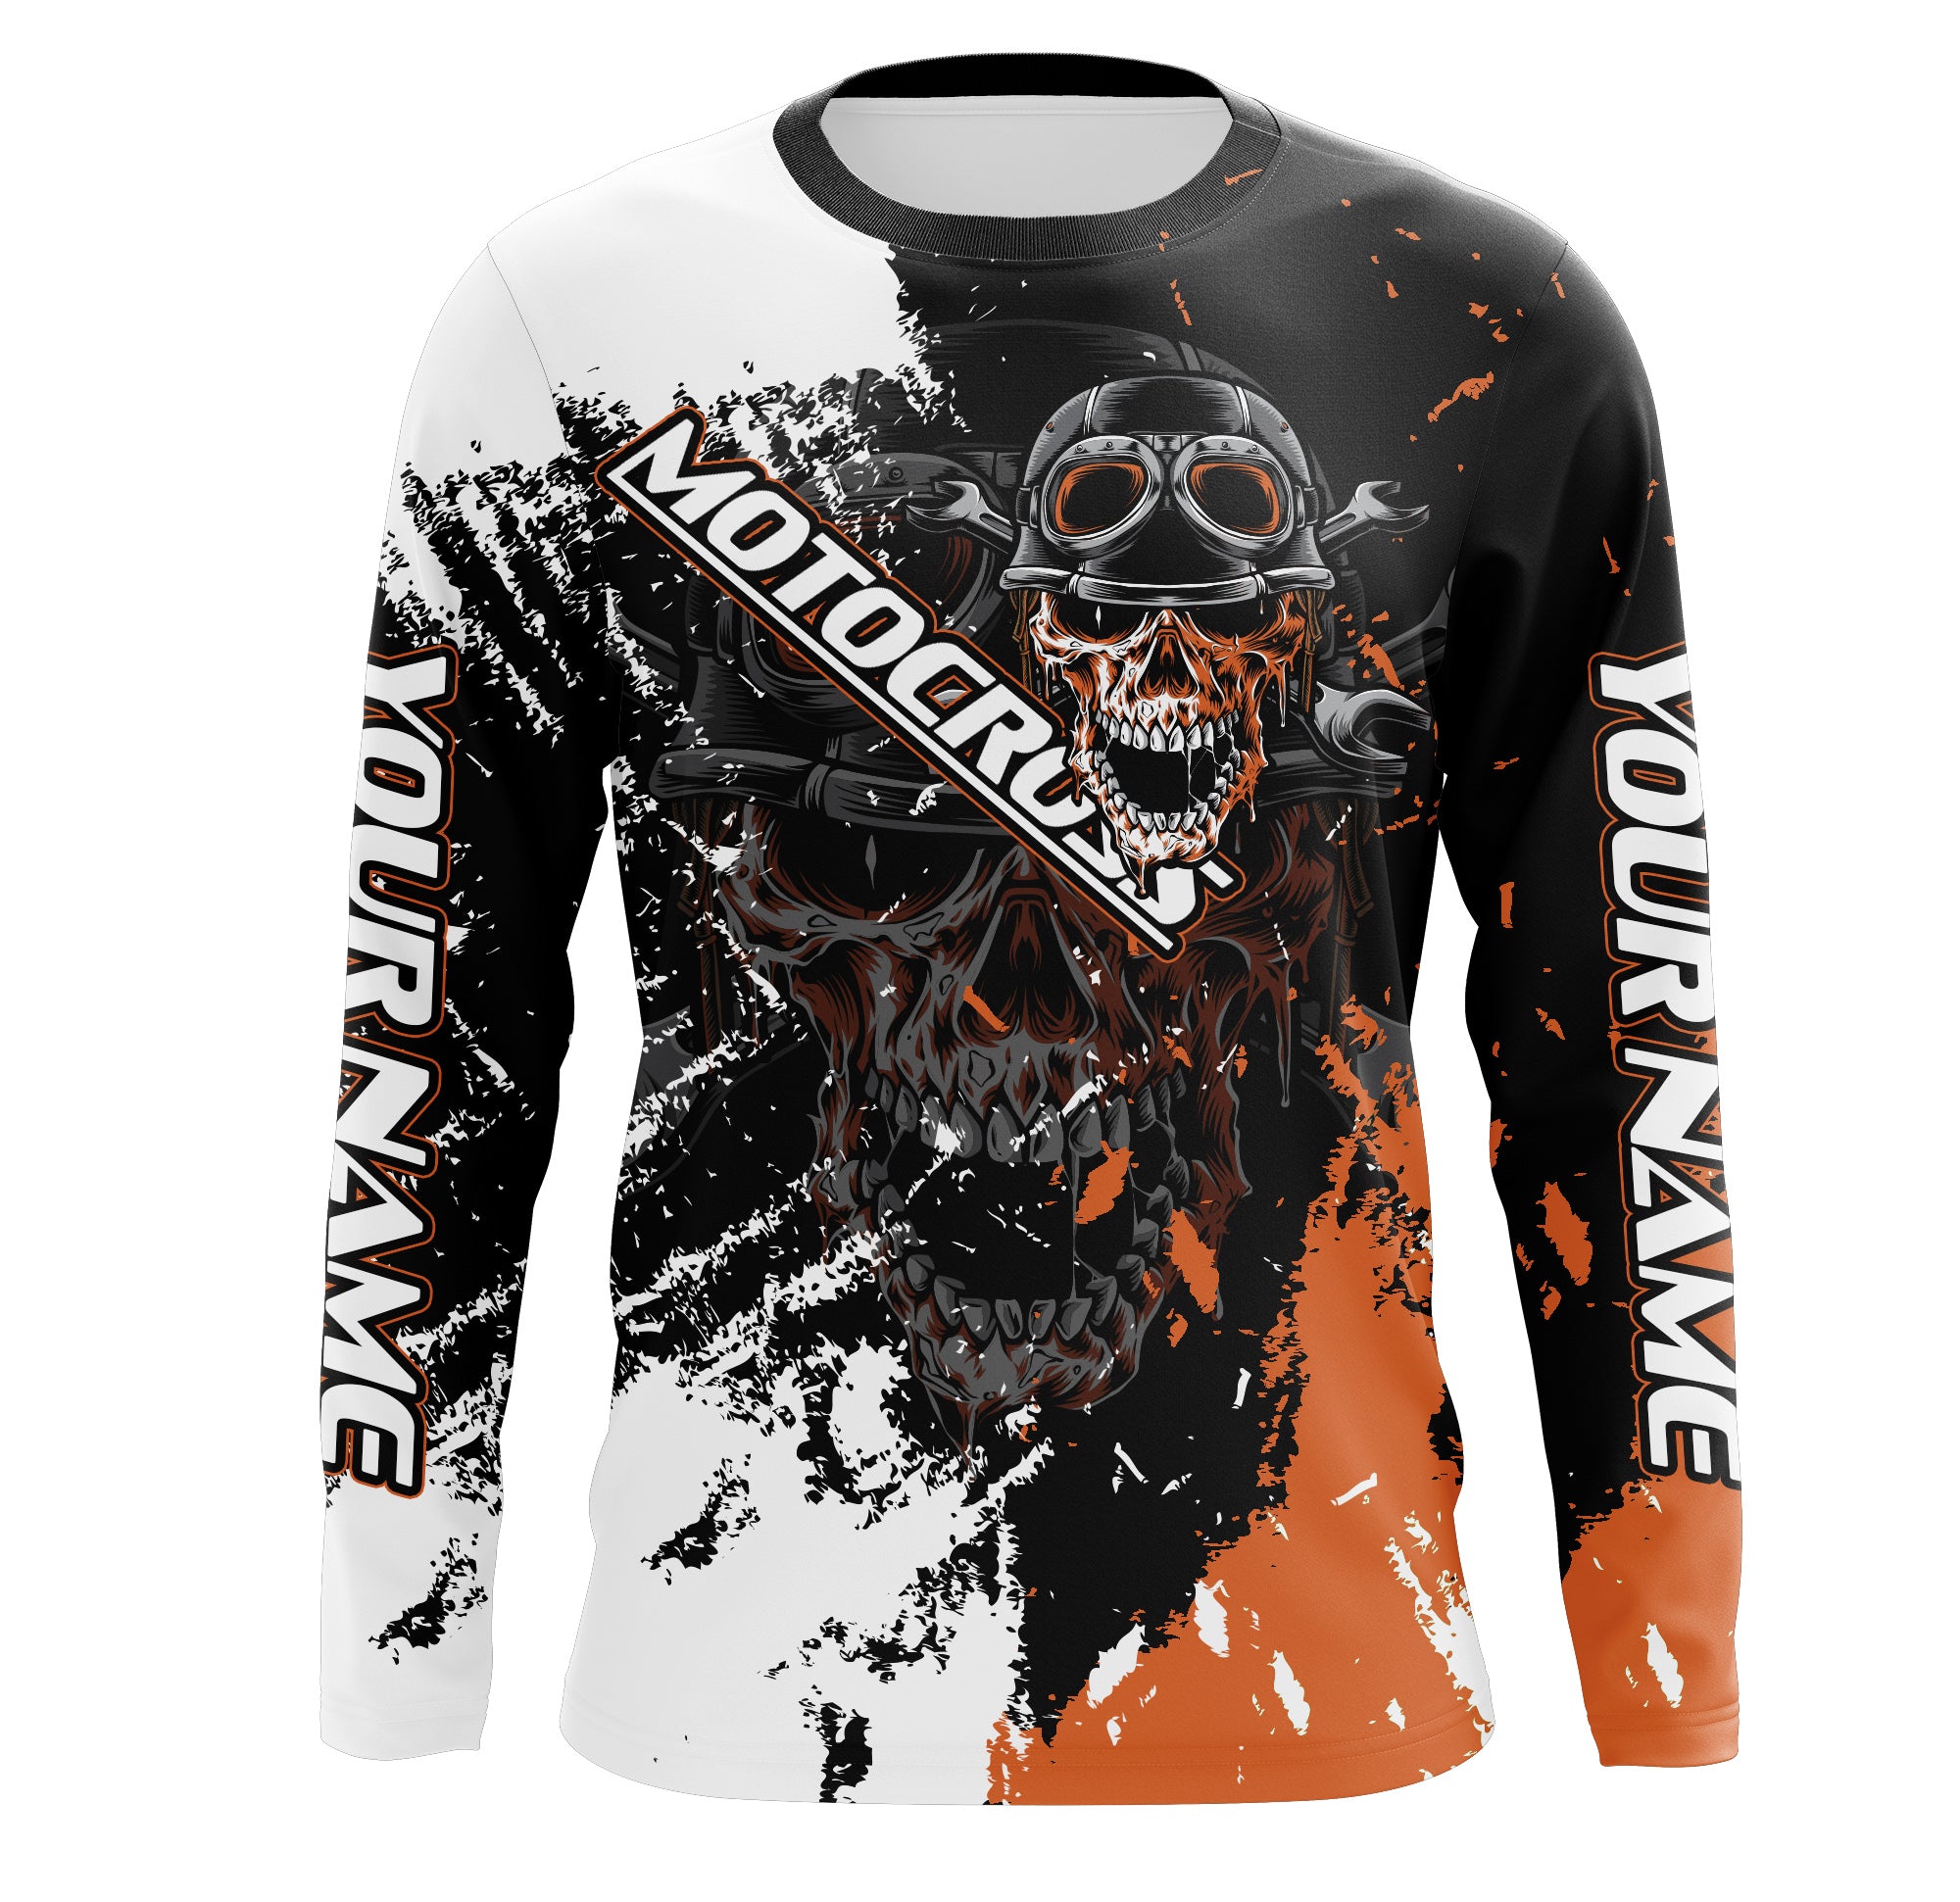 Motocross Skull Personalized Jersey UV Protect, Dirt Bike UPF 30+ Youth Long Sleeves Riders Racewear| NMS364